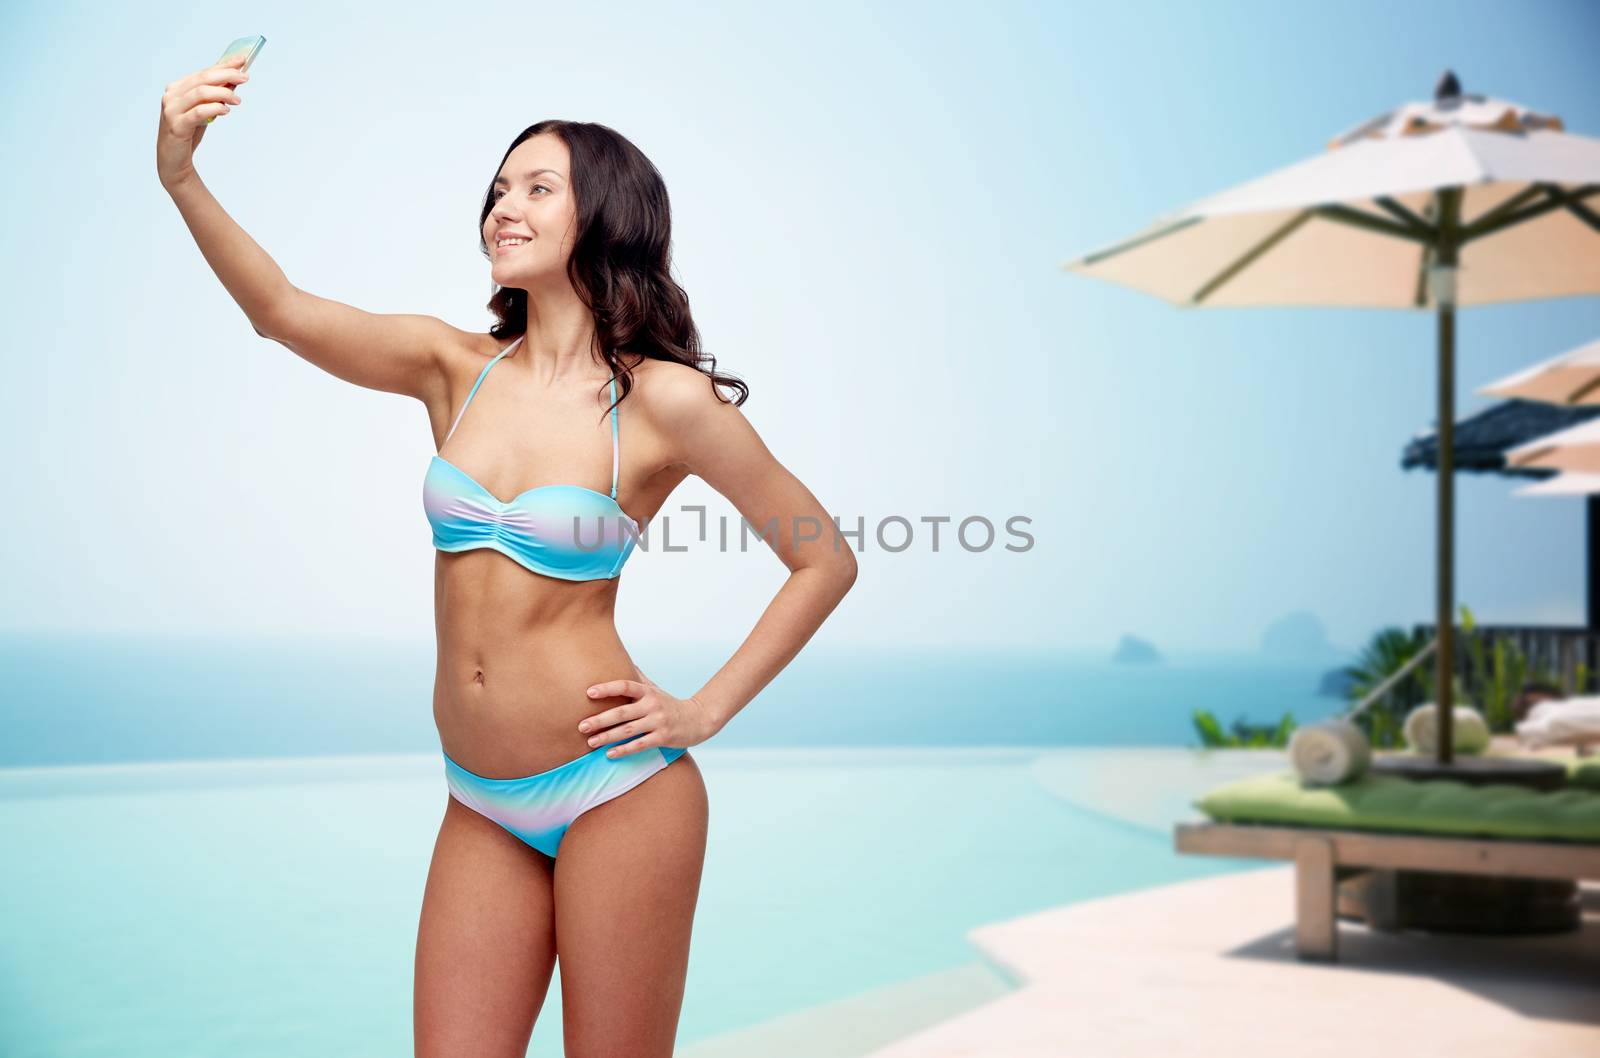 people, technology, travel, tourism and summer concept - happy young woman in bikini swimsuit taking selfie with smatphone over infinity pool with parasol and sunbed at sea side background